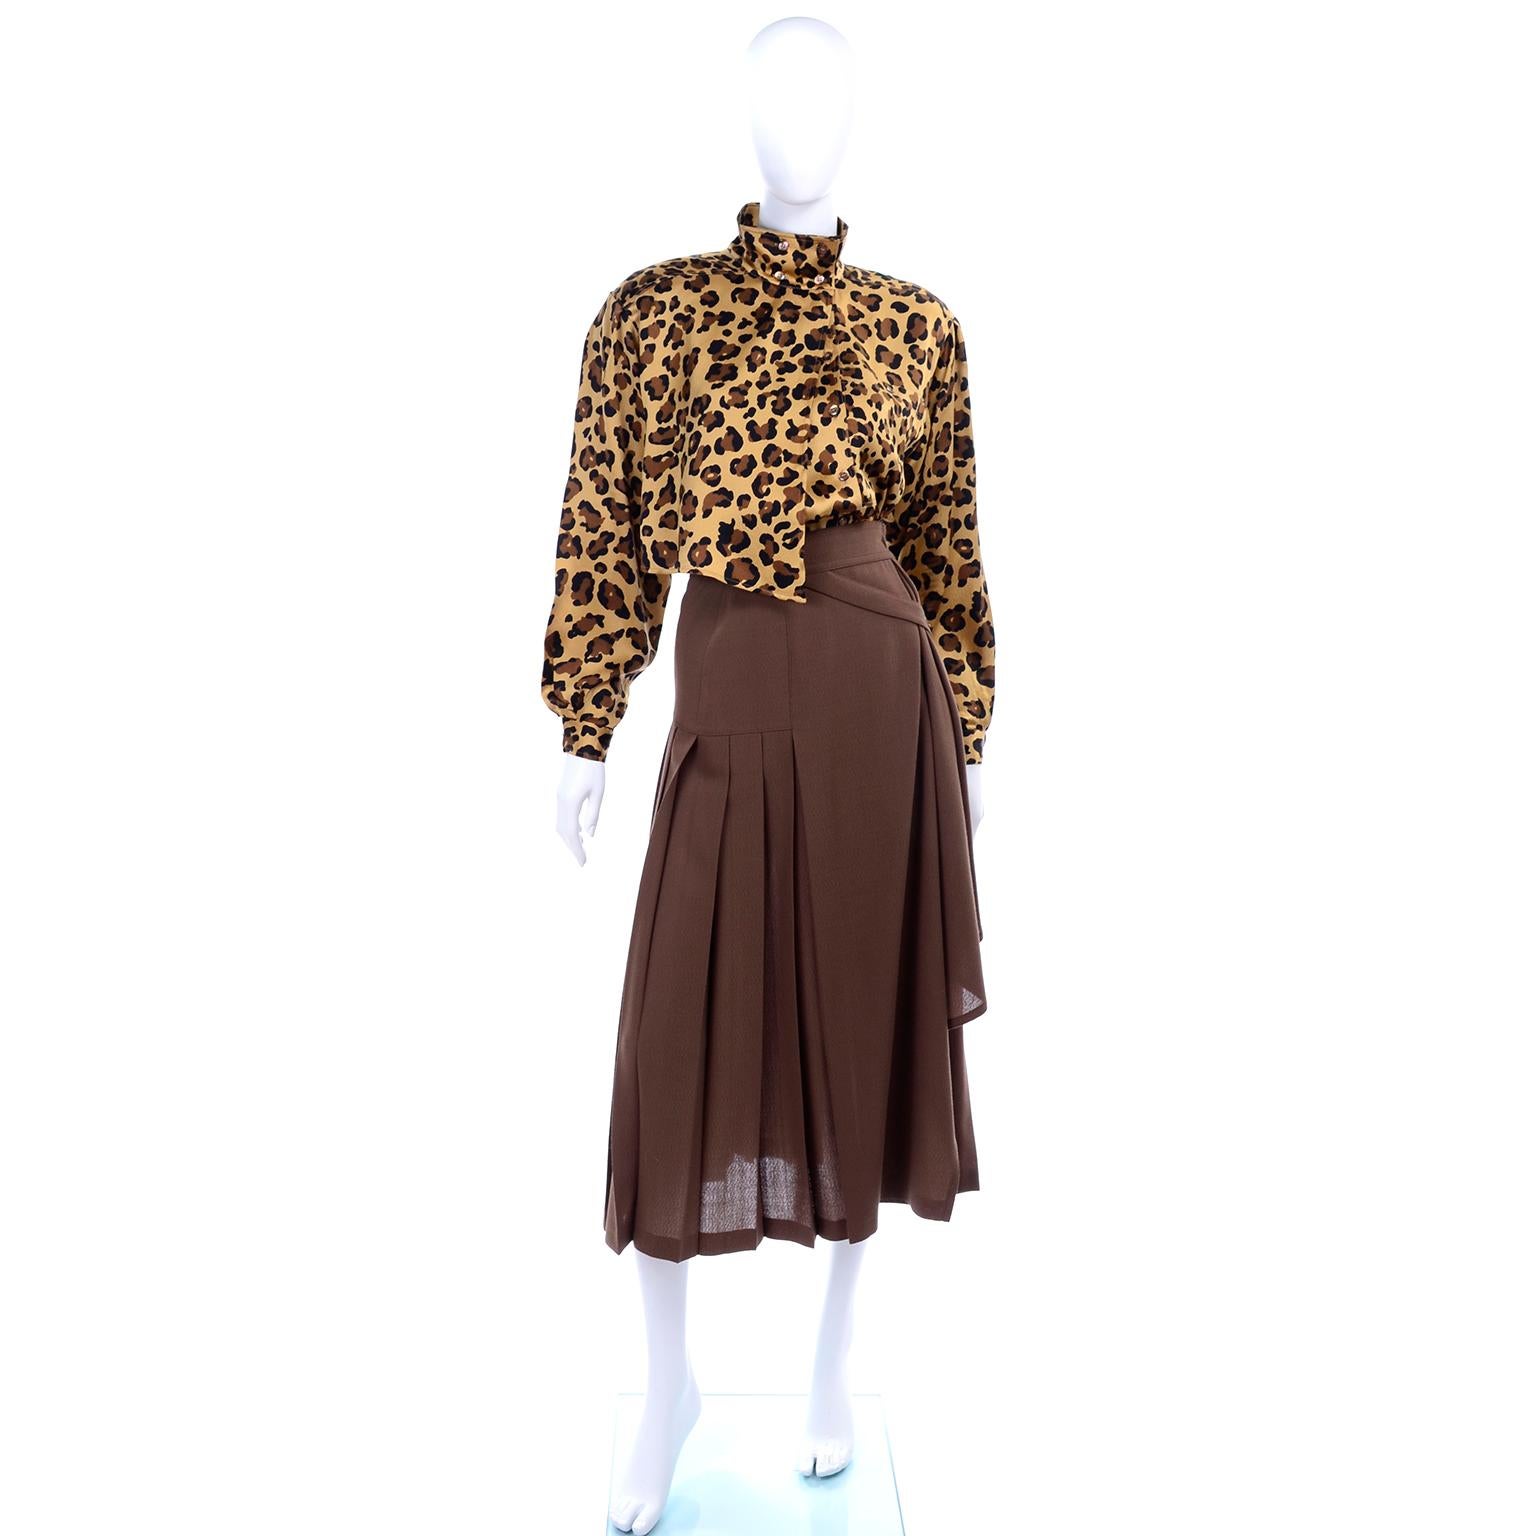 This is an incredible 2 piece Escada ensemble designed by Margaretha Ley in the 1980's. This outfit came from an estate of clothing we handled that included the best of the 1980's and many unique Escada pieces.  This has a chocolate brown wool poly